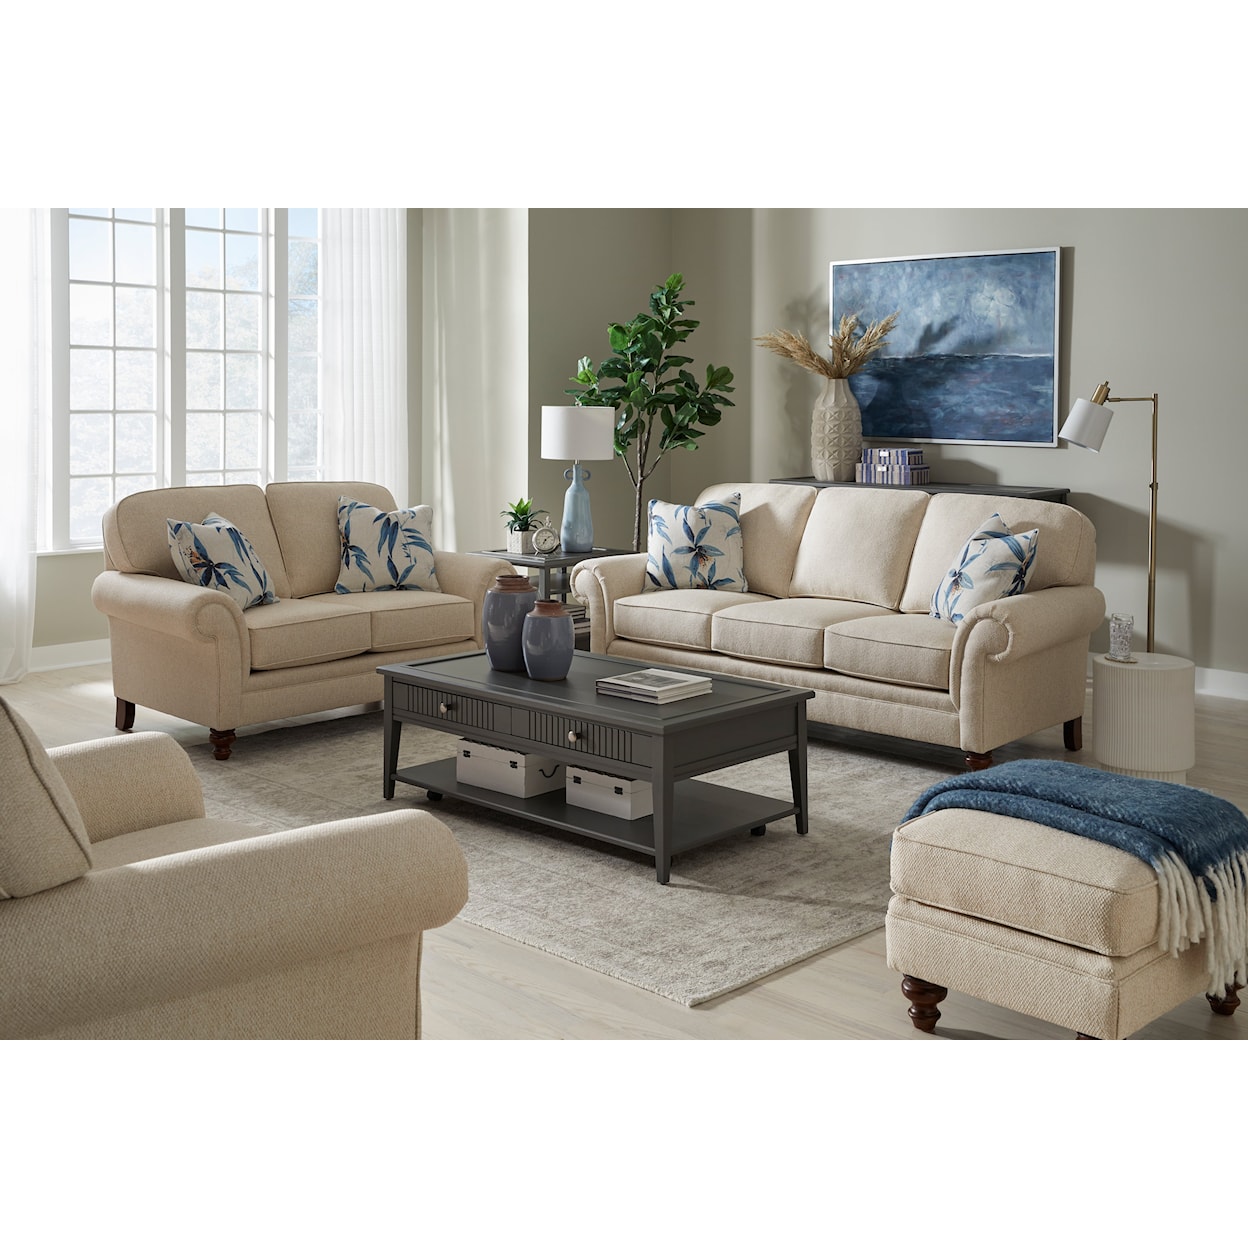 Stone & Leigh Furniture Larissa Rolled Arm Sofa with Tropical Pillows